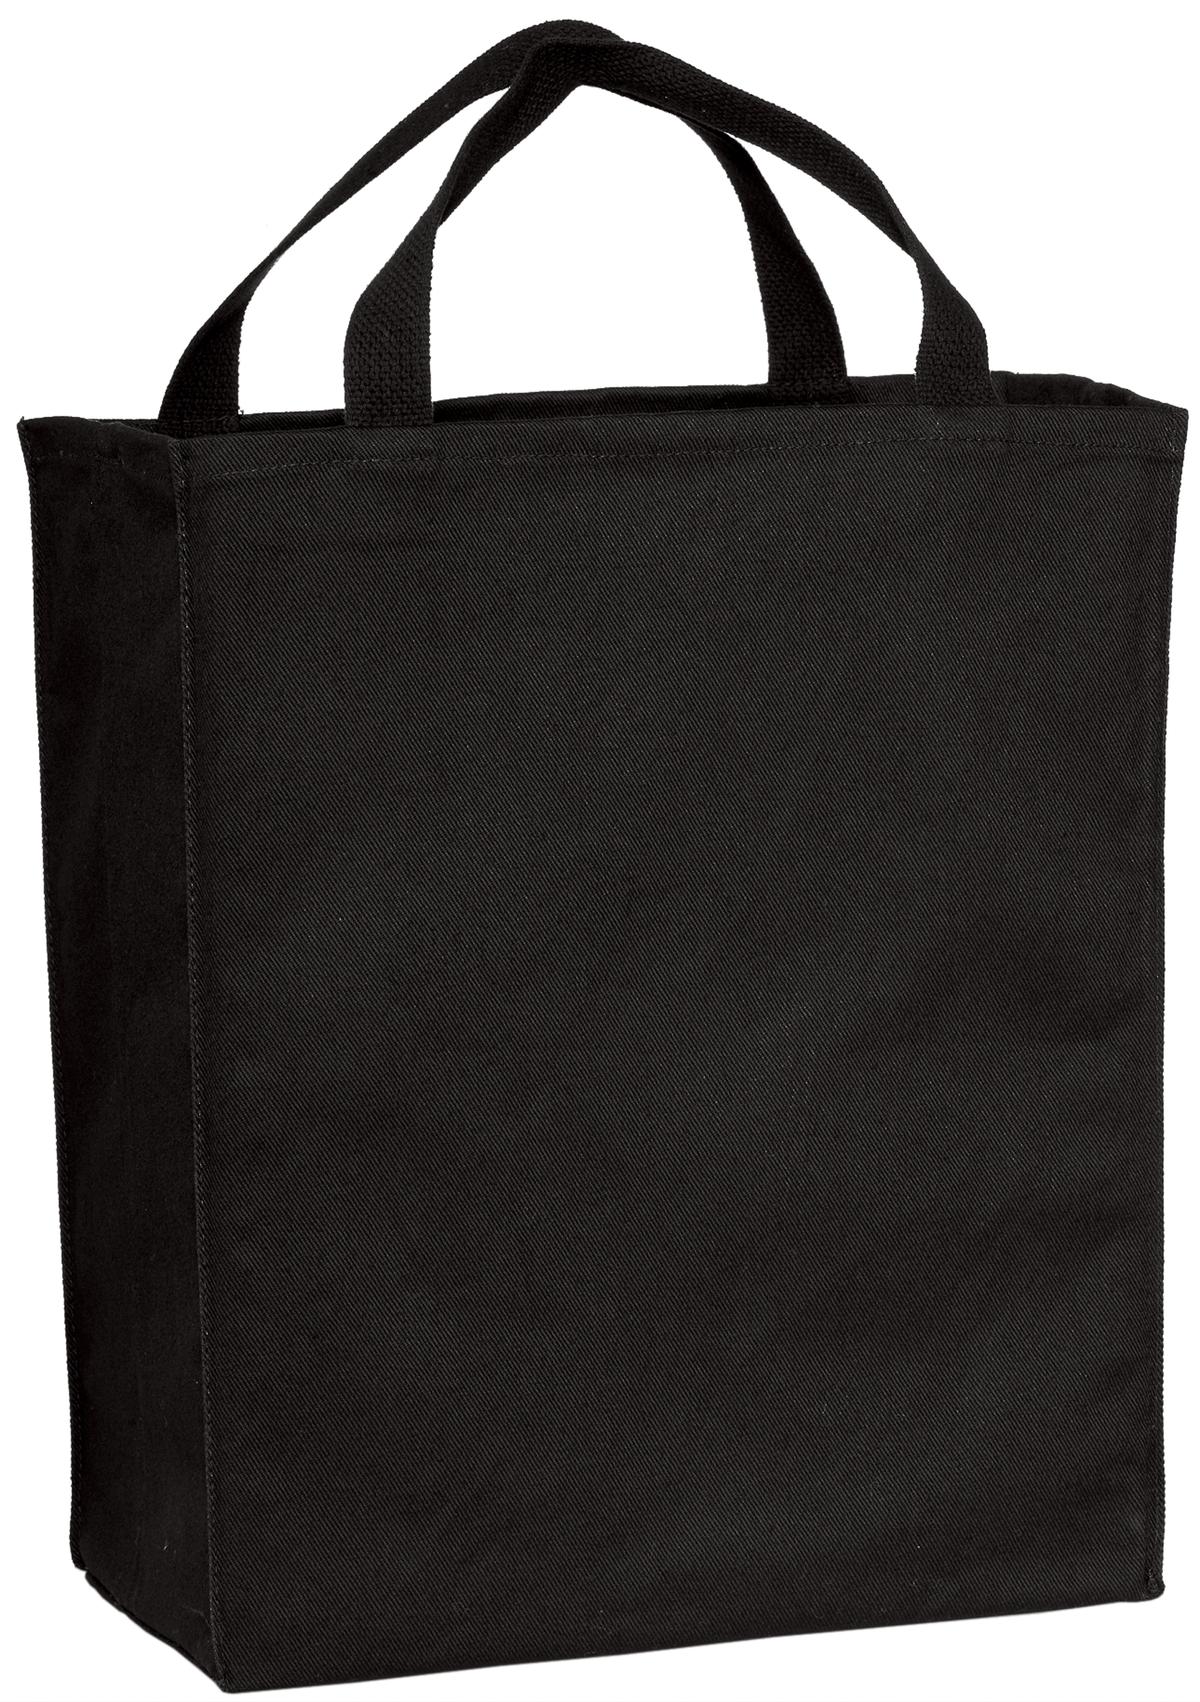 Port Authority Grocery Tote.  B100